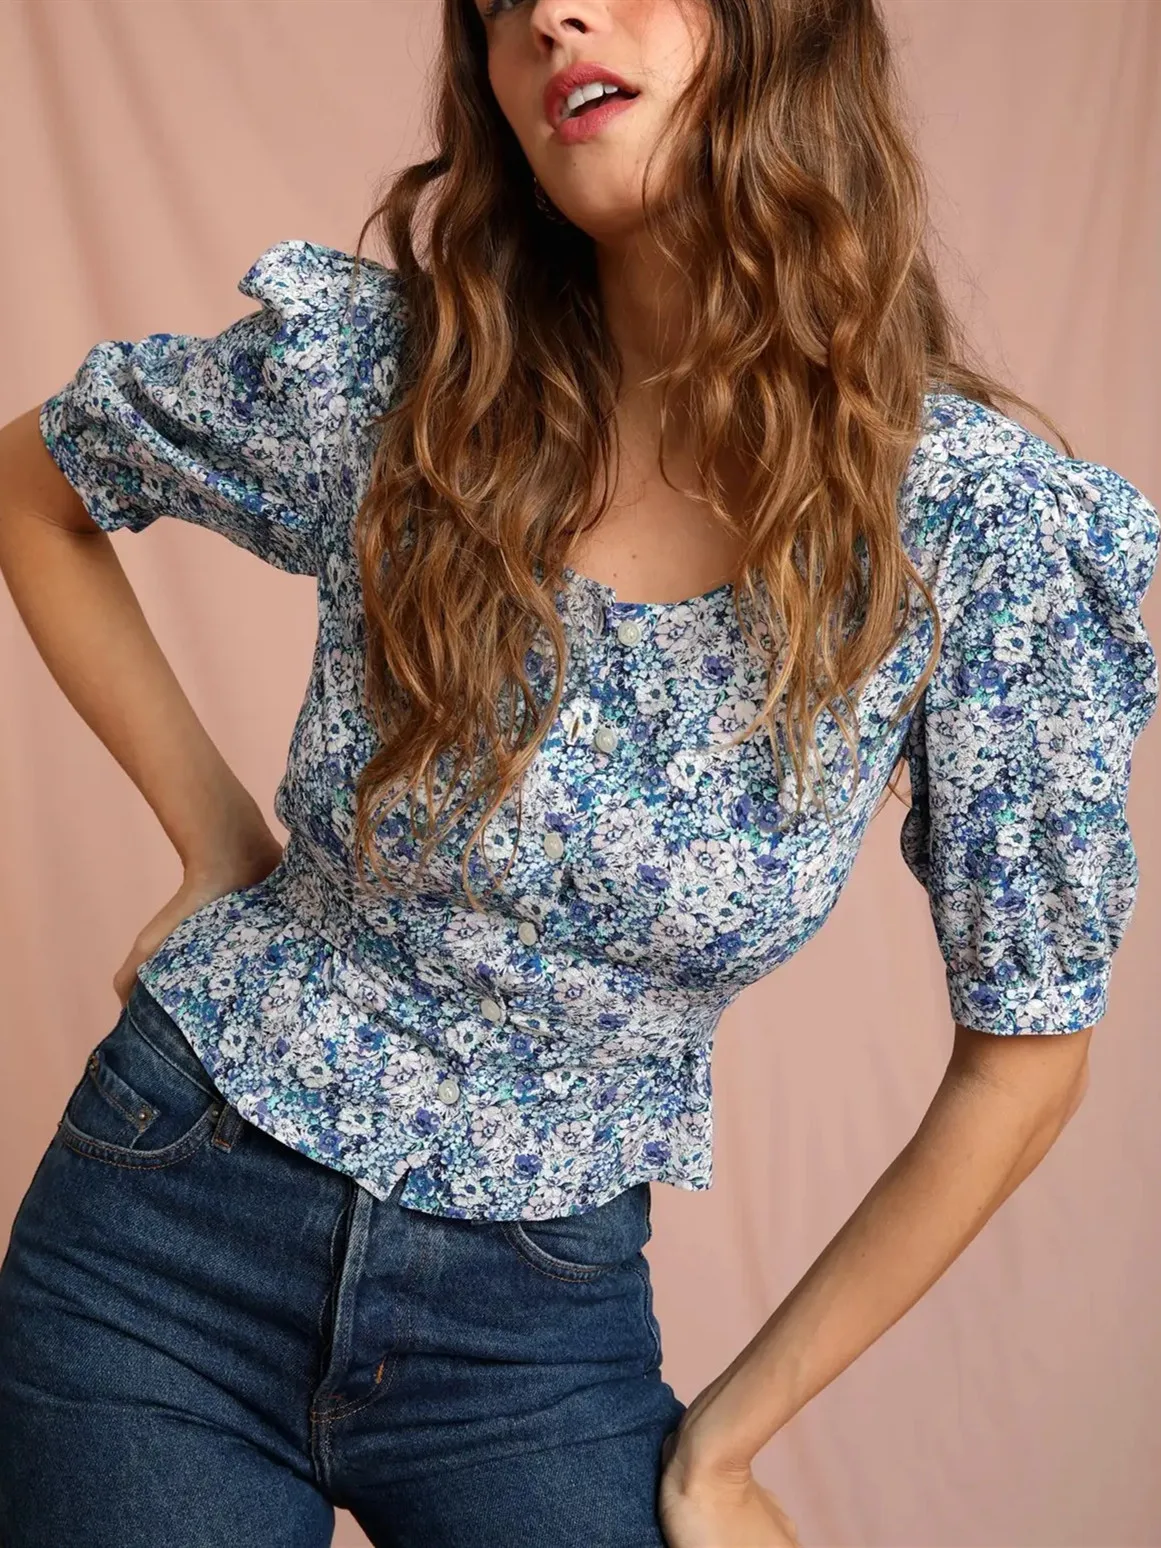 

2022 New Lady 100% Viscose Flowers Print Blouse Women Short Puff Sleeve O-Neck Back Lace-Up Shirt Top Summer Style Shirts